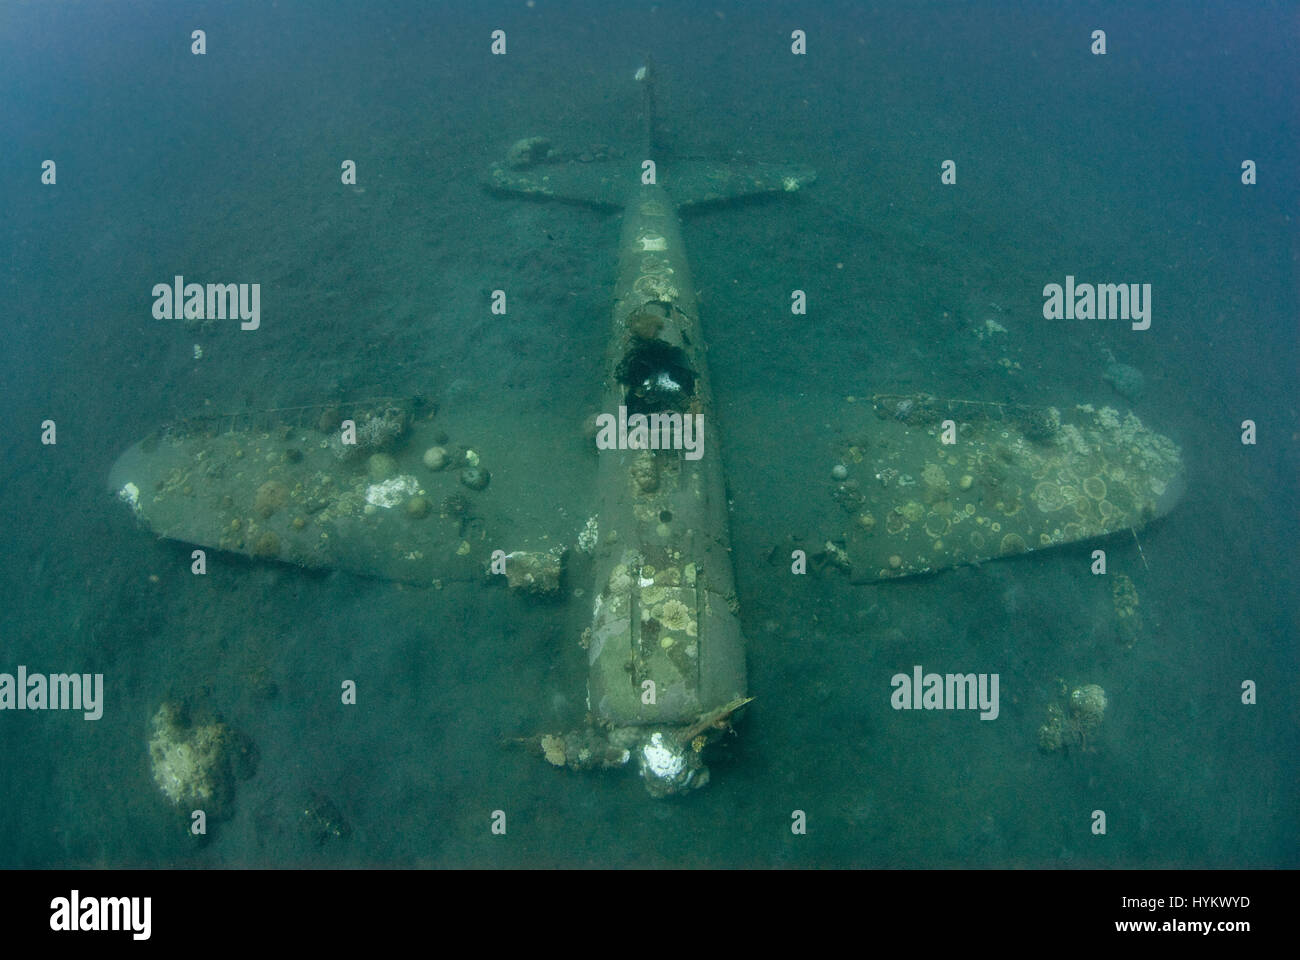 SOLOMON ISLANDS, PACIFIC OCEAN: A picture of a Mitsubishi A6M Zero long range fighter aircraft. THE REMNANTS of a fierce world war two battle have been captured at one hundred and eight five feet underwater. Pictures show these once powerful war machines, now lying dormant on the sea-bed.  A Japanese Mitsubishi A6M Zero long ranger fighter aircraft, an America Grumman F6F 3 Hellcat and a Boeing B-17 Flying Fortress are shown in various degrees of decay with colourful coral growing out from now their rusted shells, some of which included the human remains of the tragic crewmen (not pictured). C Stock Photo